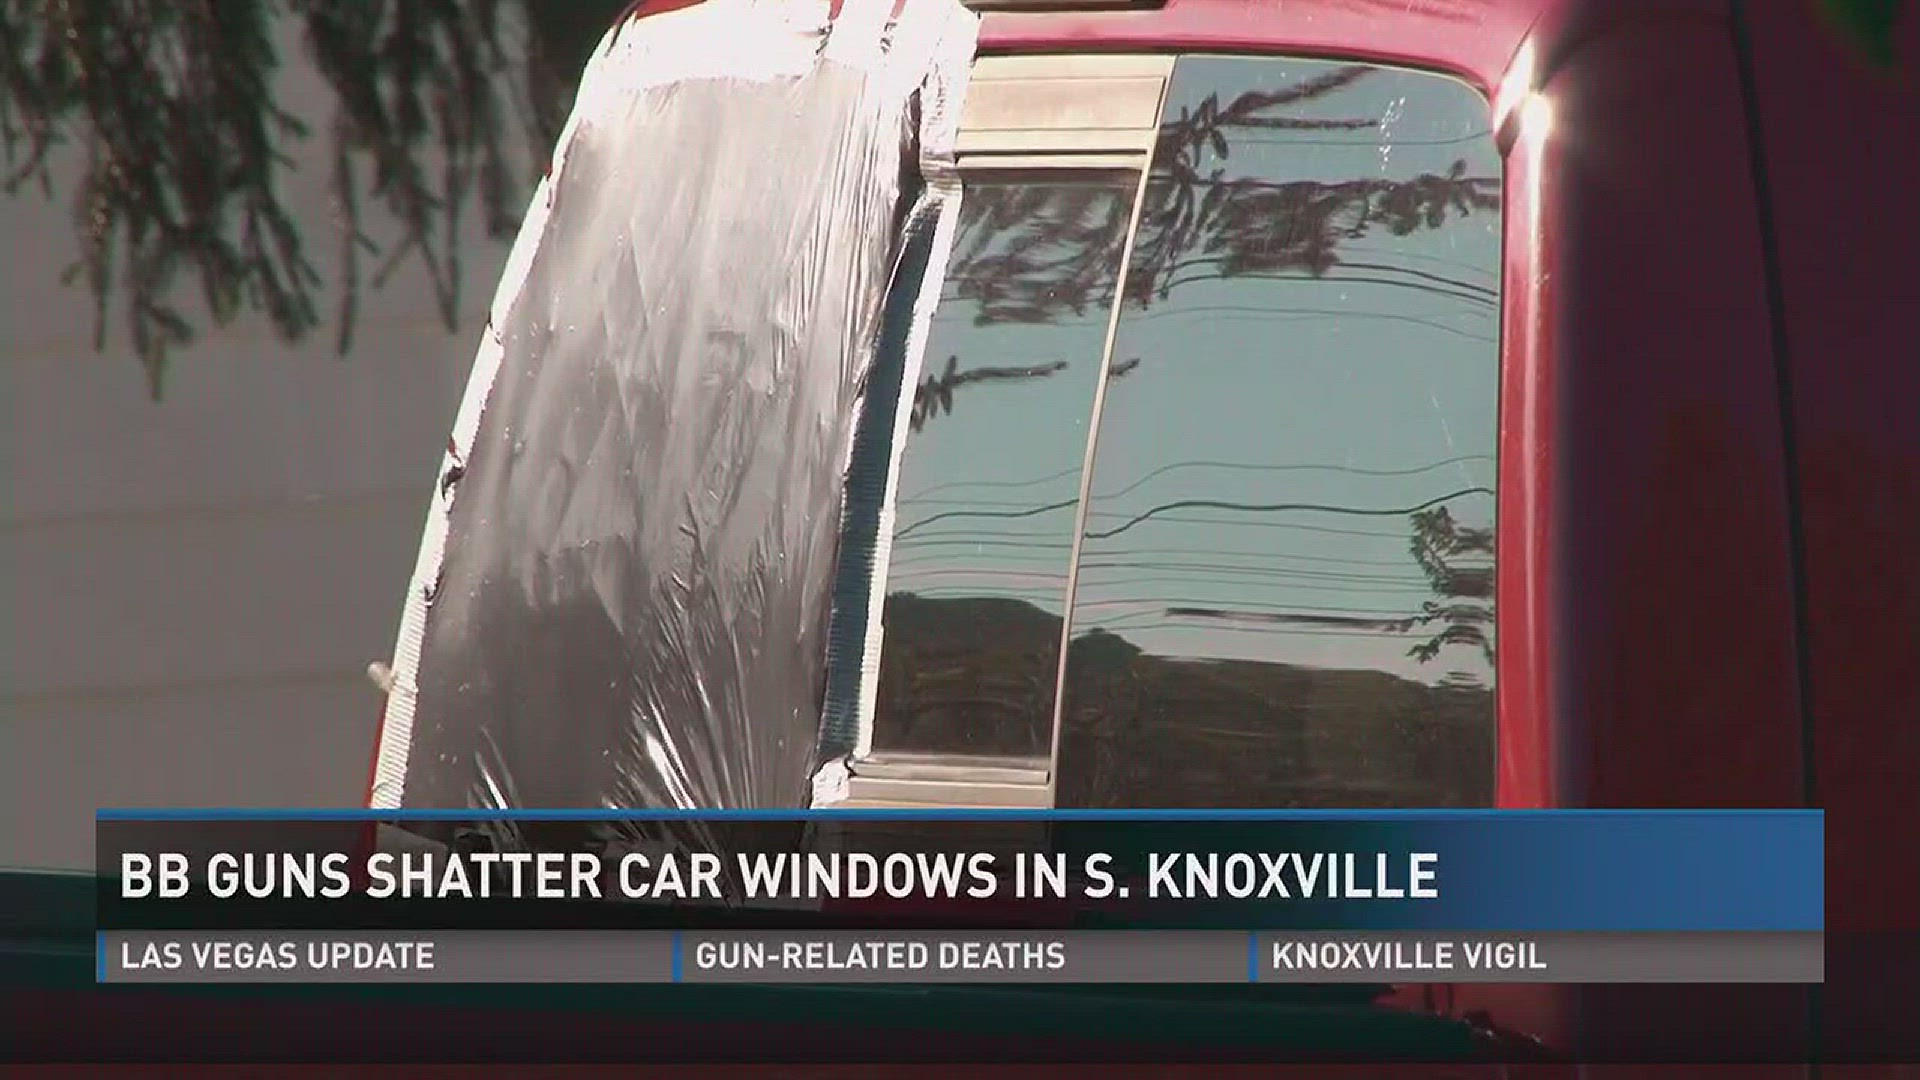 Knoxville Police say they've received about 15 car vandalism reports in the last two days--some involving BB pellets shattering car windows.